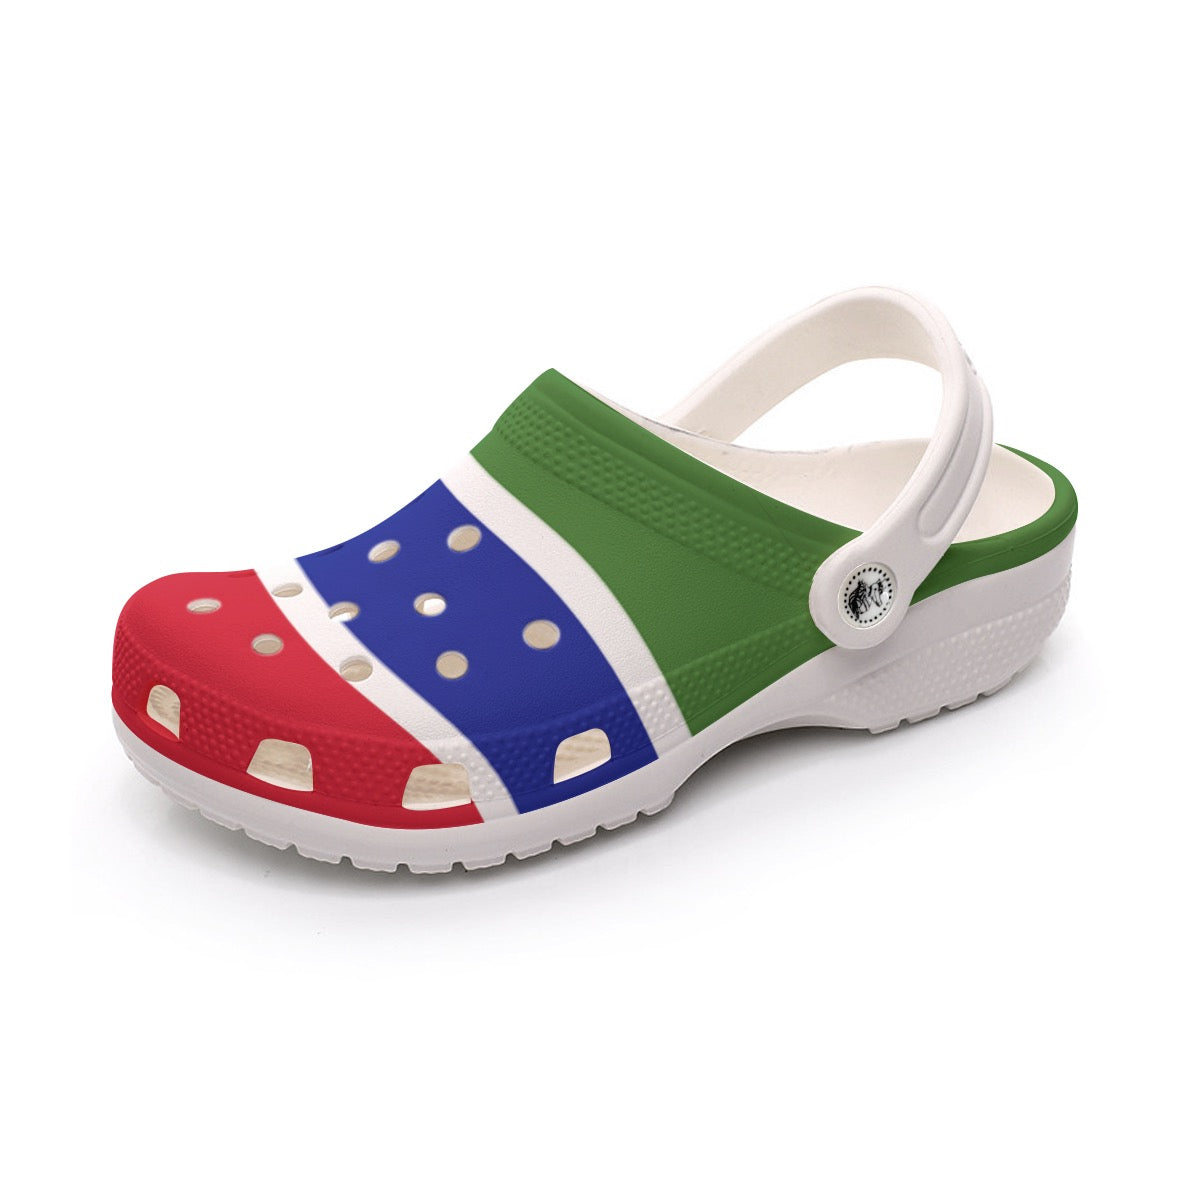 The Gambia Clogs - Mens